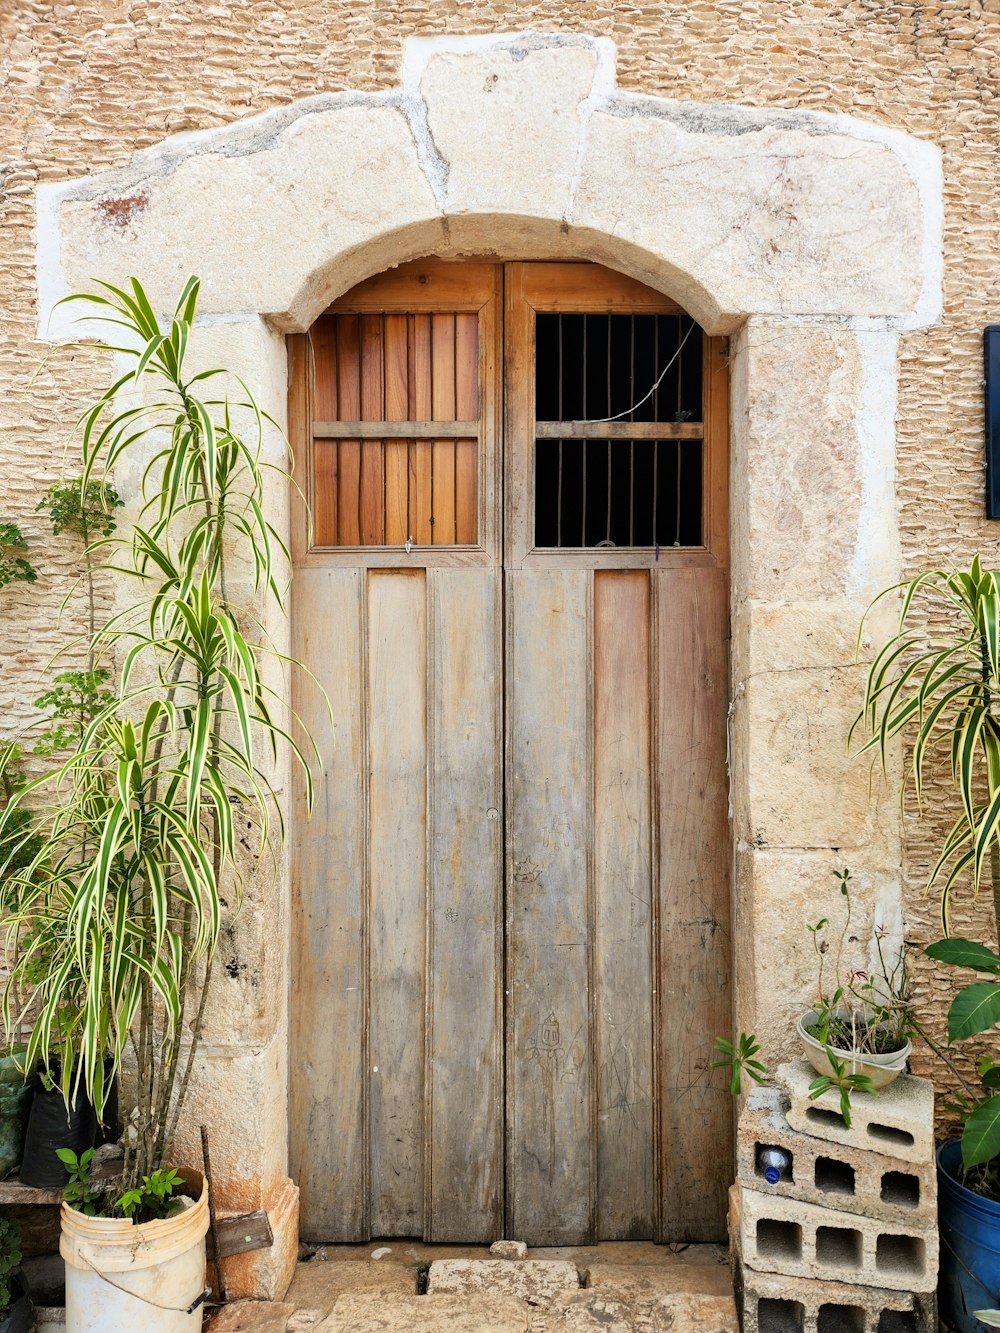 a wooden door with a window and plant pots